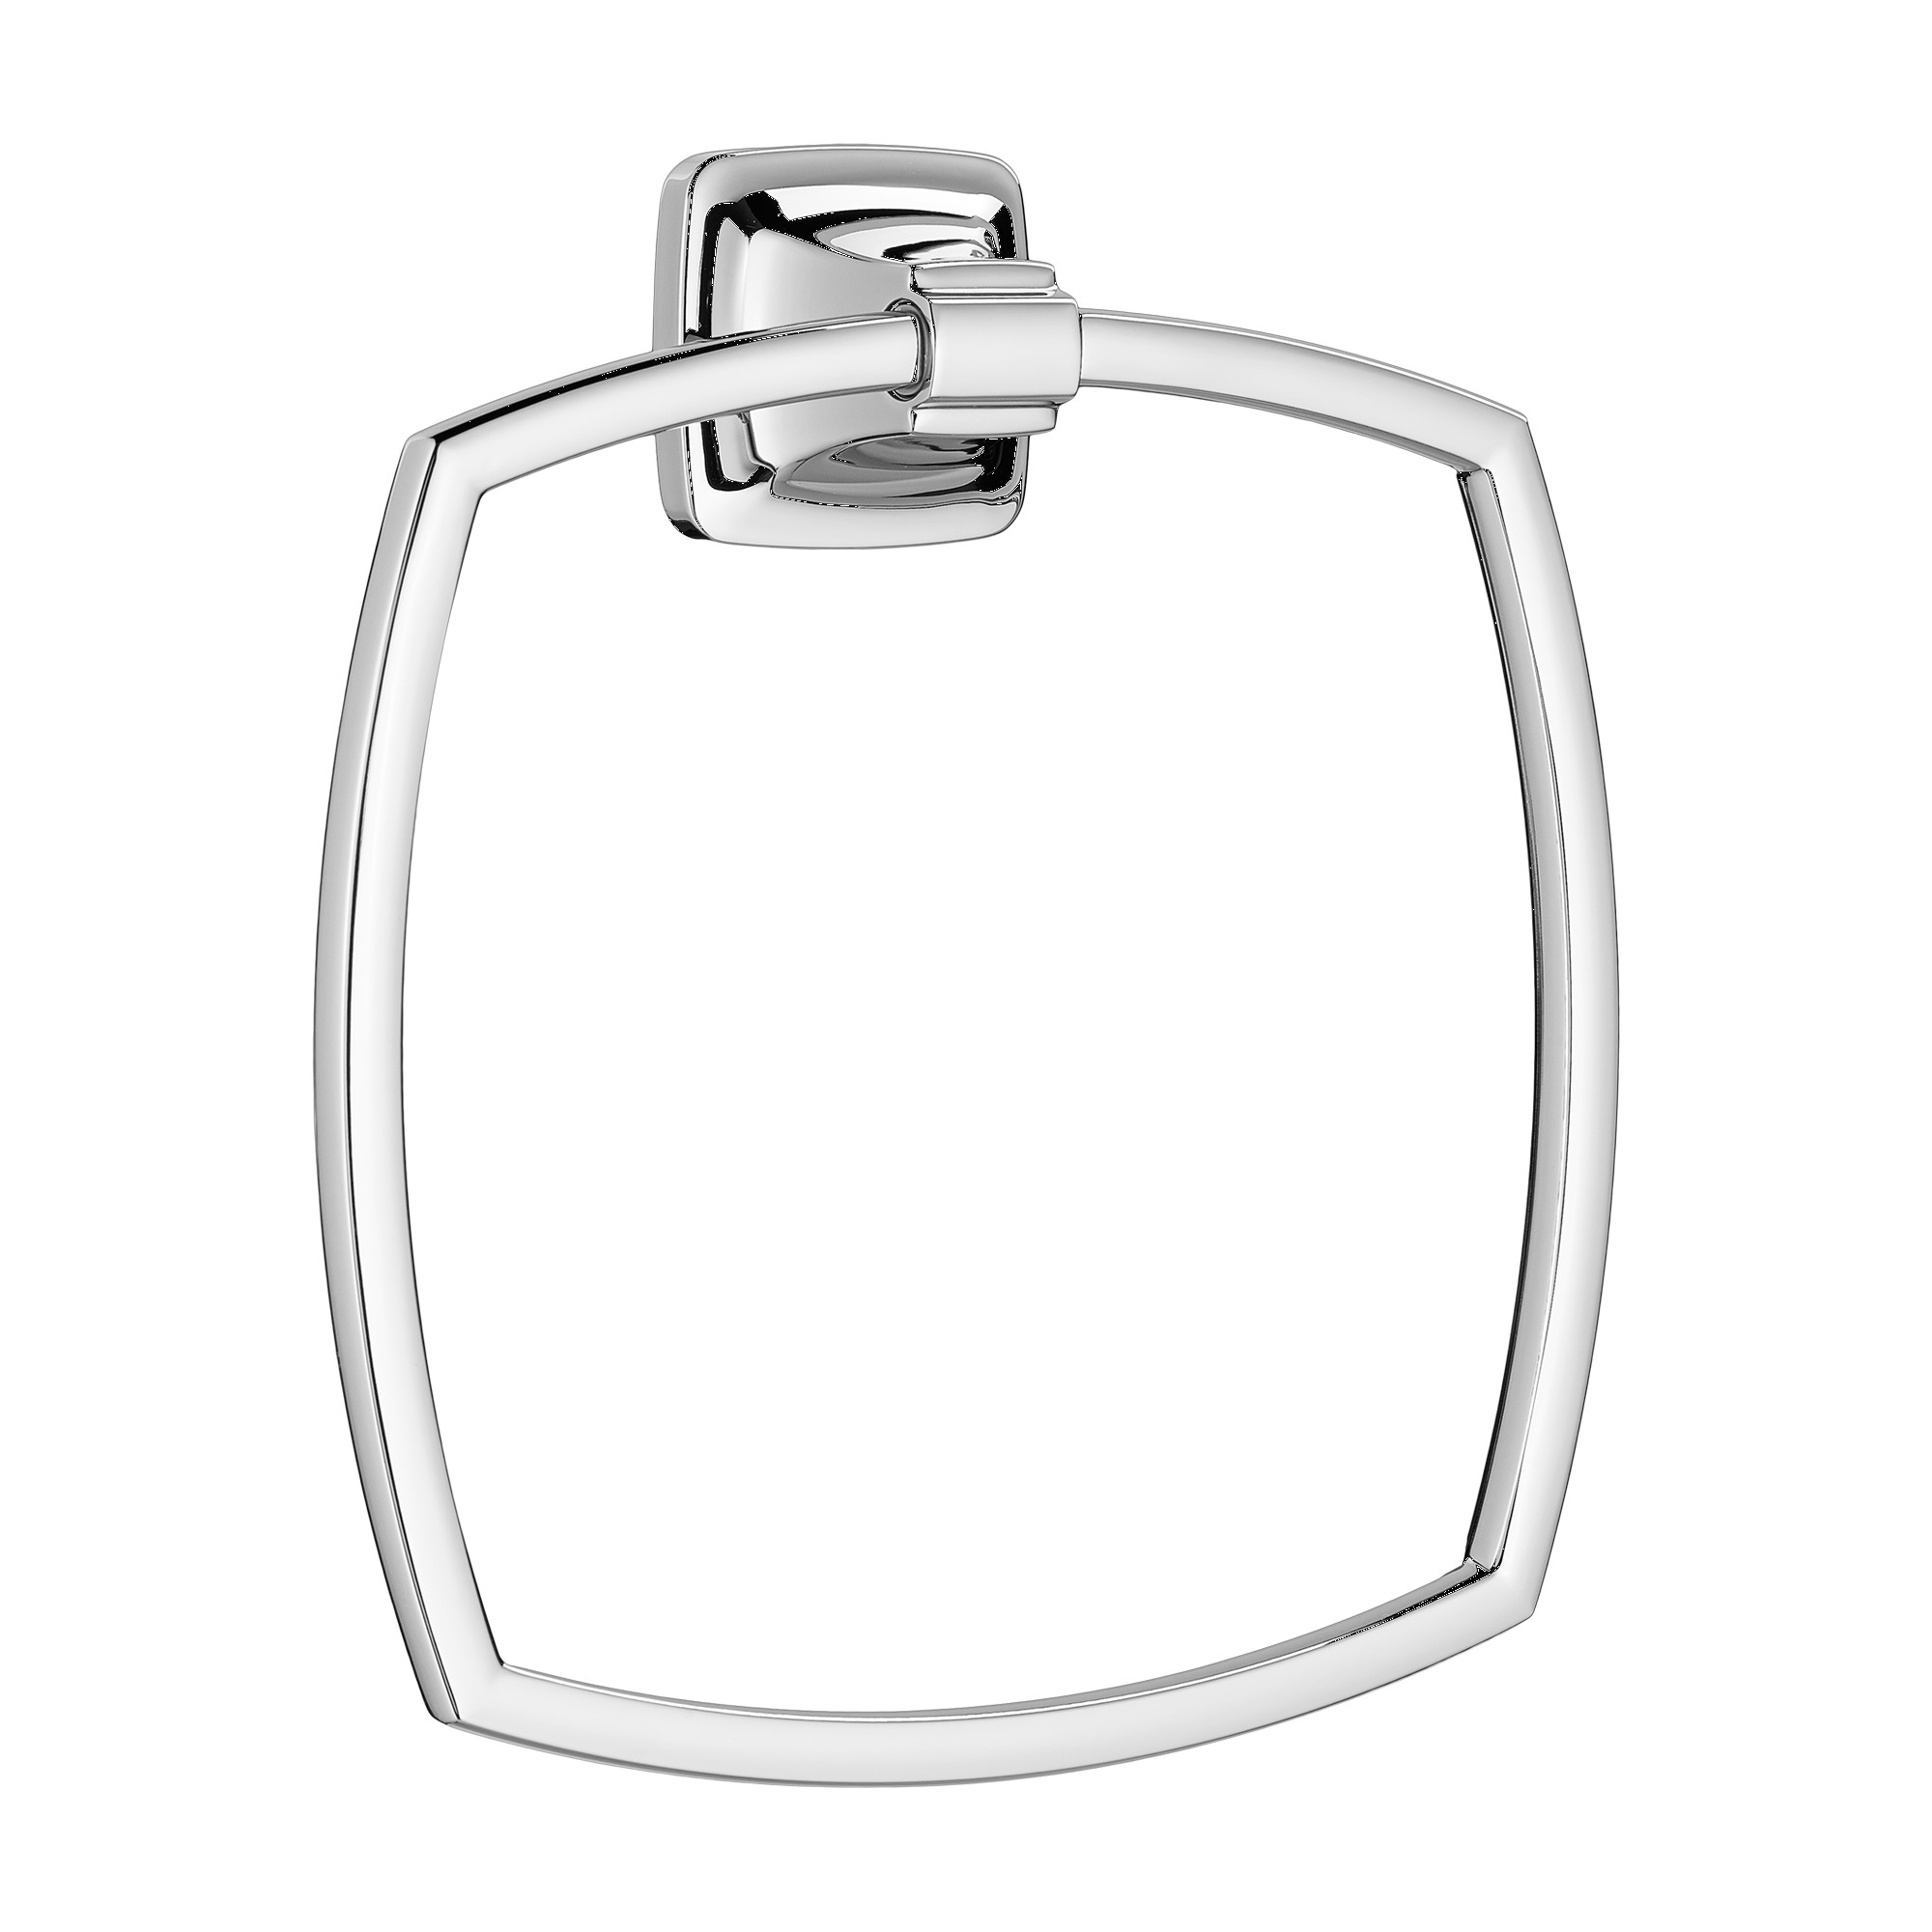 American Standard | 7353.190.002 | AMERICAN STANDARD 7353.190 TOWNSEND TOWEL RING CP 002 POLISHED CHROME